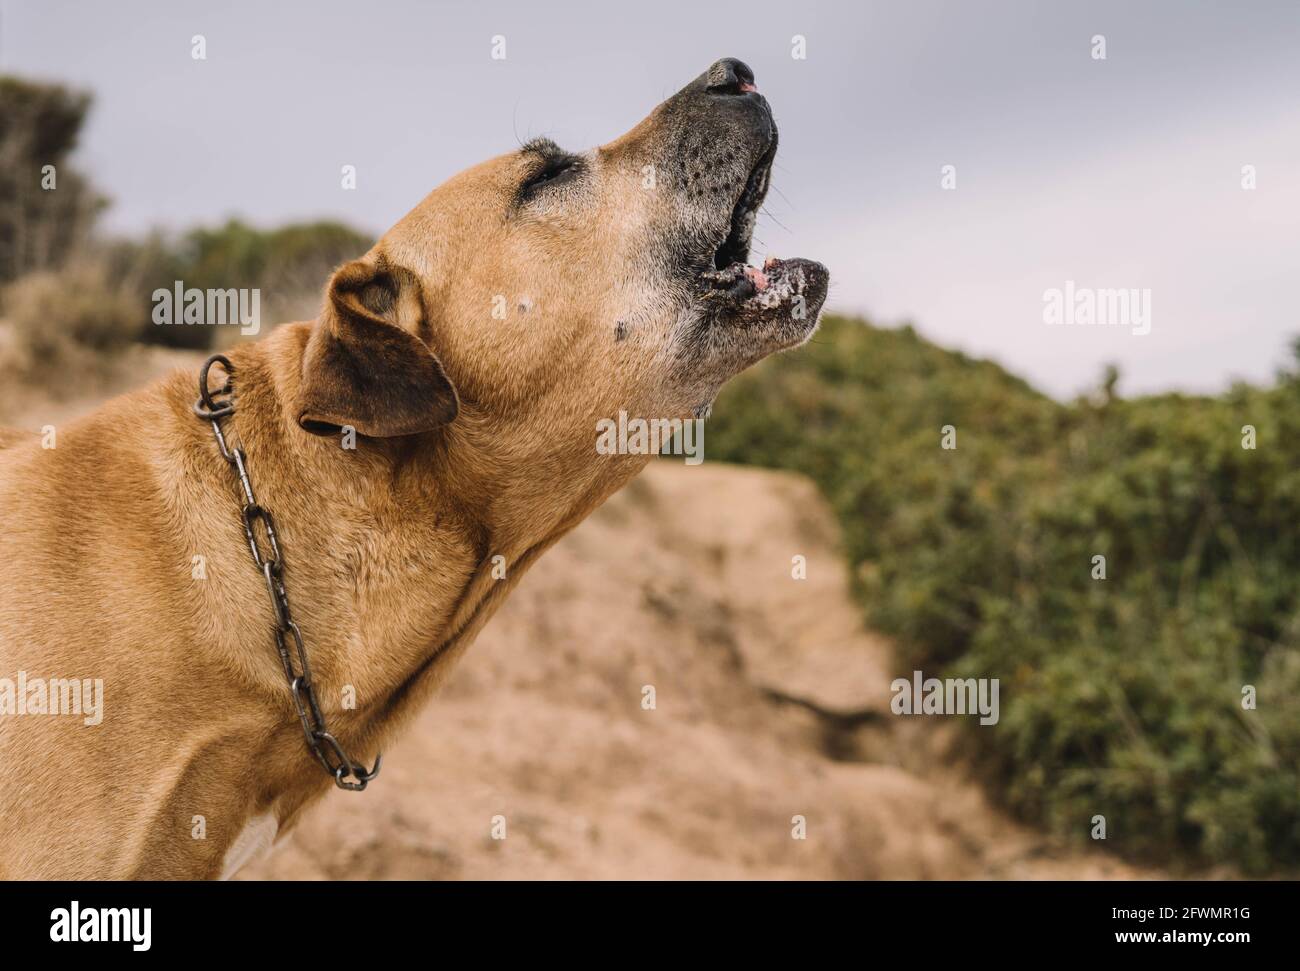 Old and brown Uruguayan cimarron breed dog enjoying a sunny day in the Stock Photo